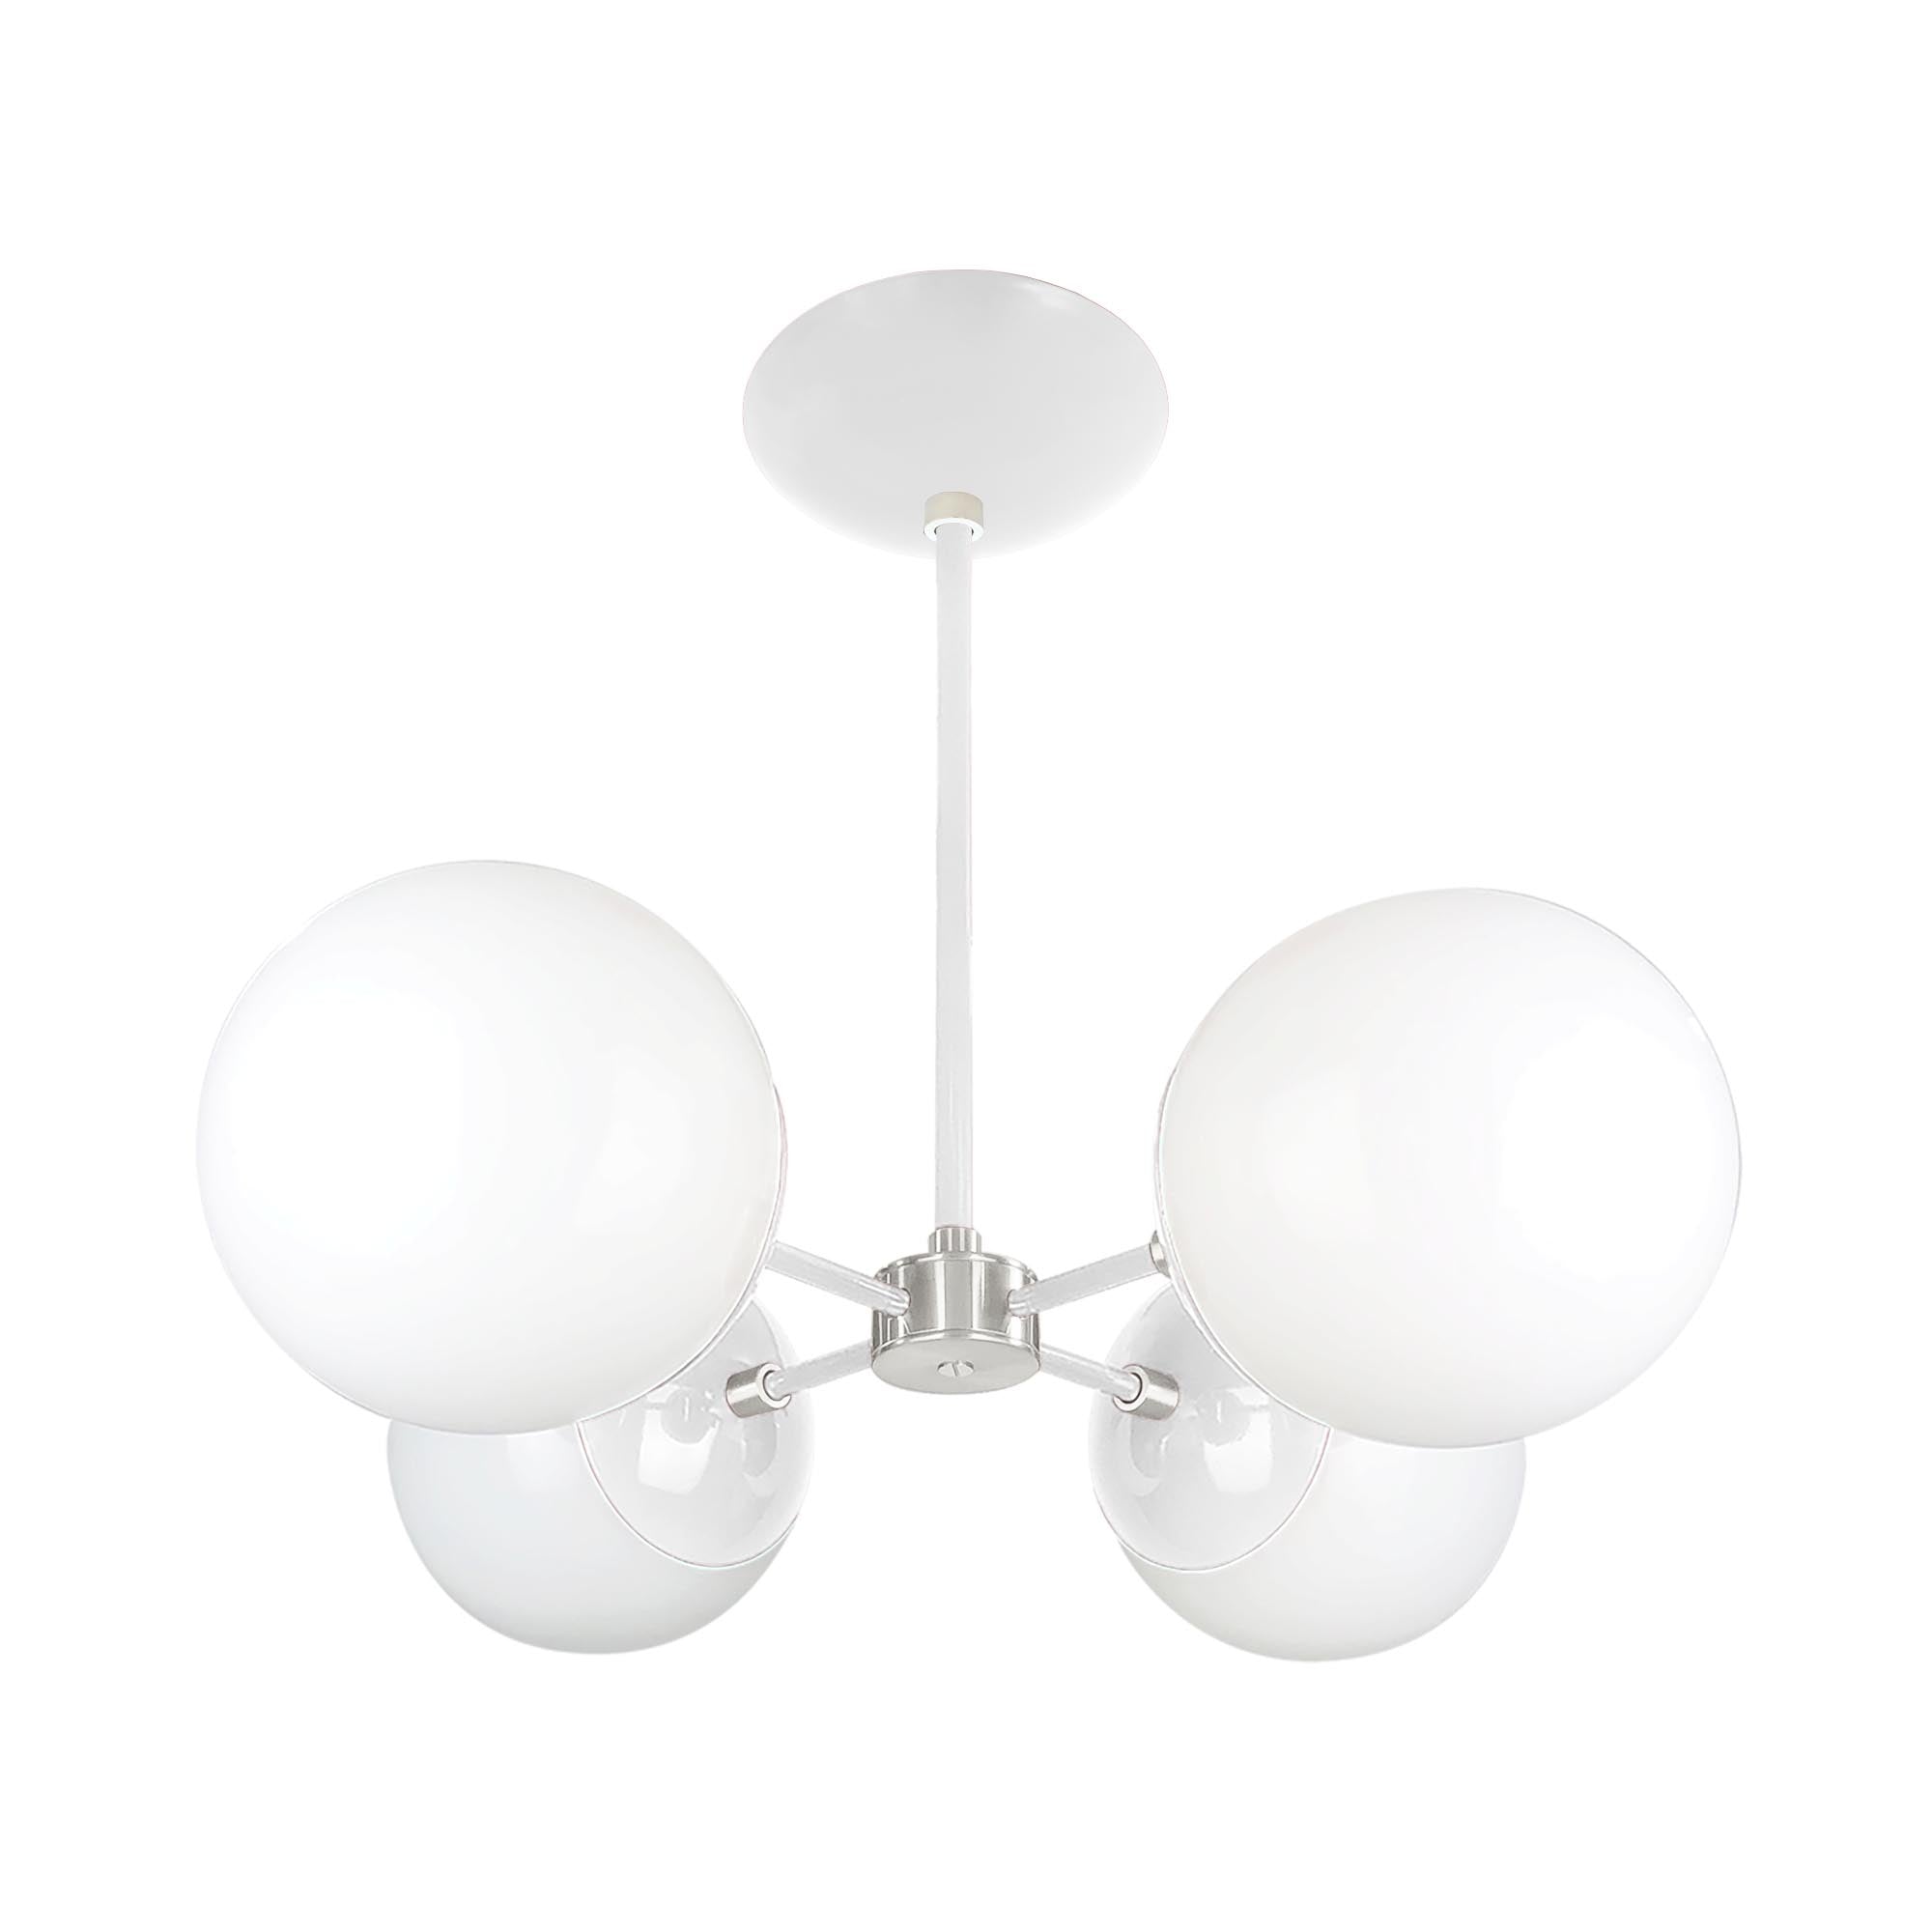 Nickel and white color Orbi chandelier Dutton Brown lighting